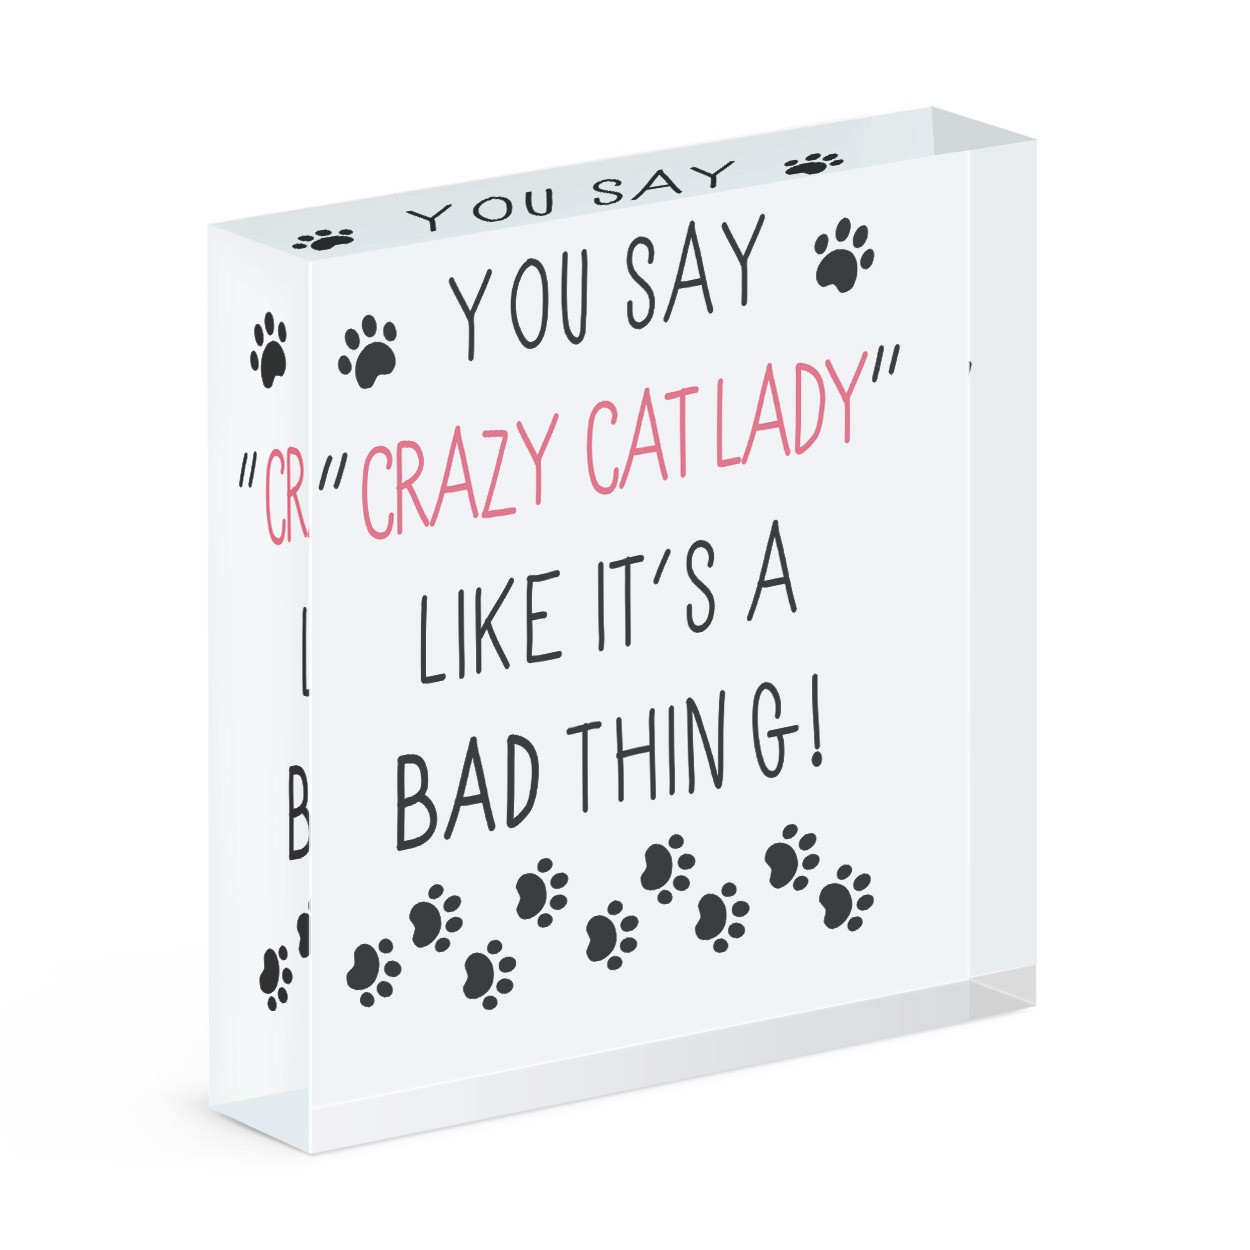 You Say Crazy Cat Lady Like It's A Bad Thing Acrylic Block